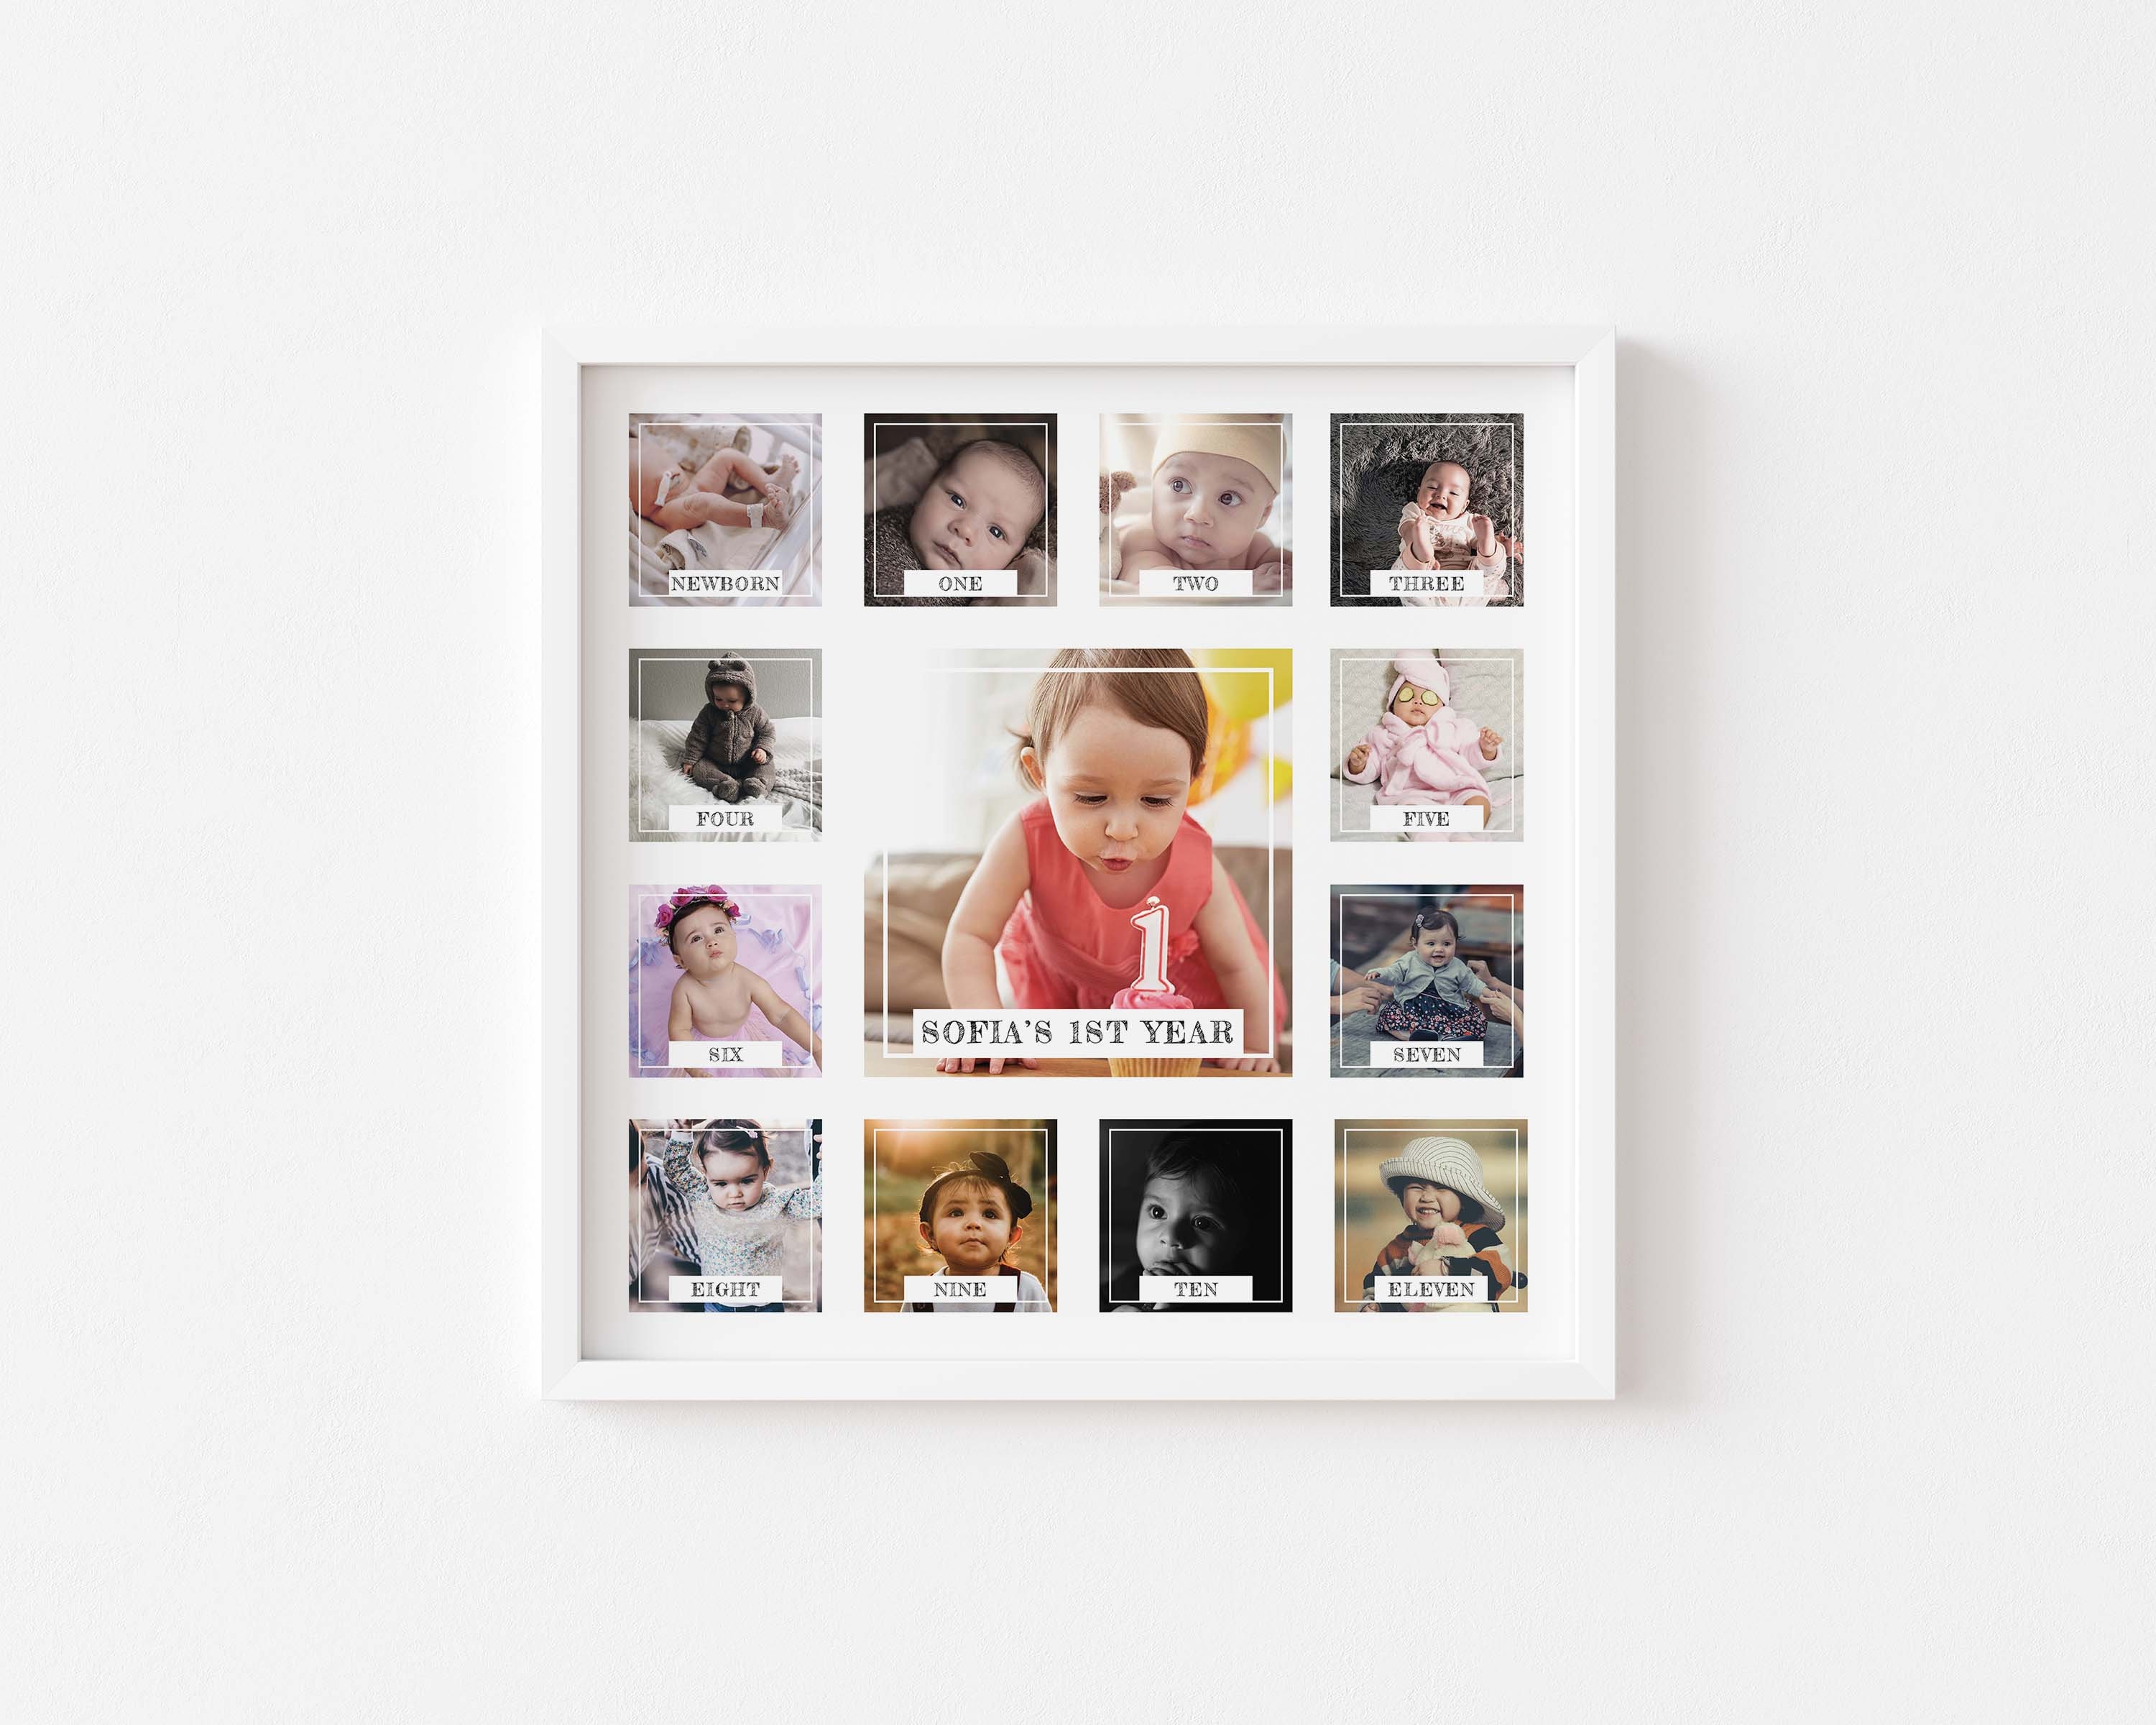 Black My First Year Baby Photo Frame Newborn Baby Keepsake Frame Kit Wood Kids Wall Hanging Picture Frame 12 Month Photo Frame Unique Baby Gifts The Perfect Decorations for Room Wall Feibi 